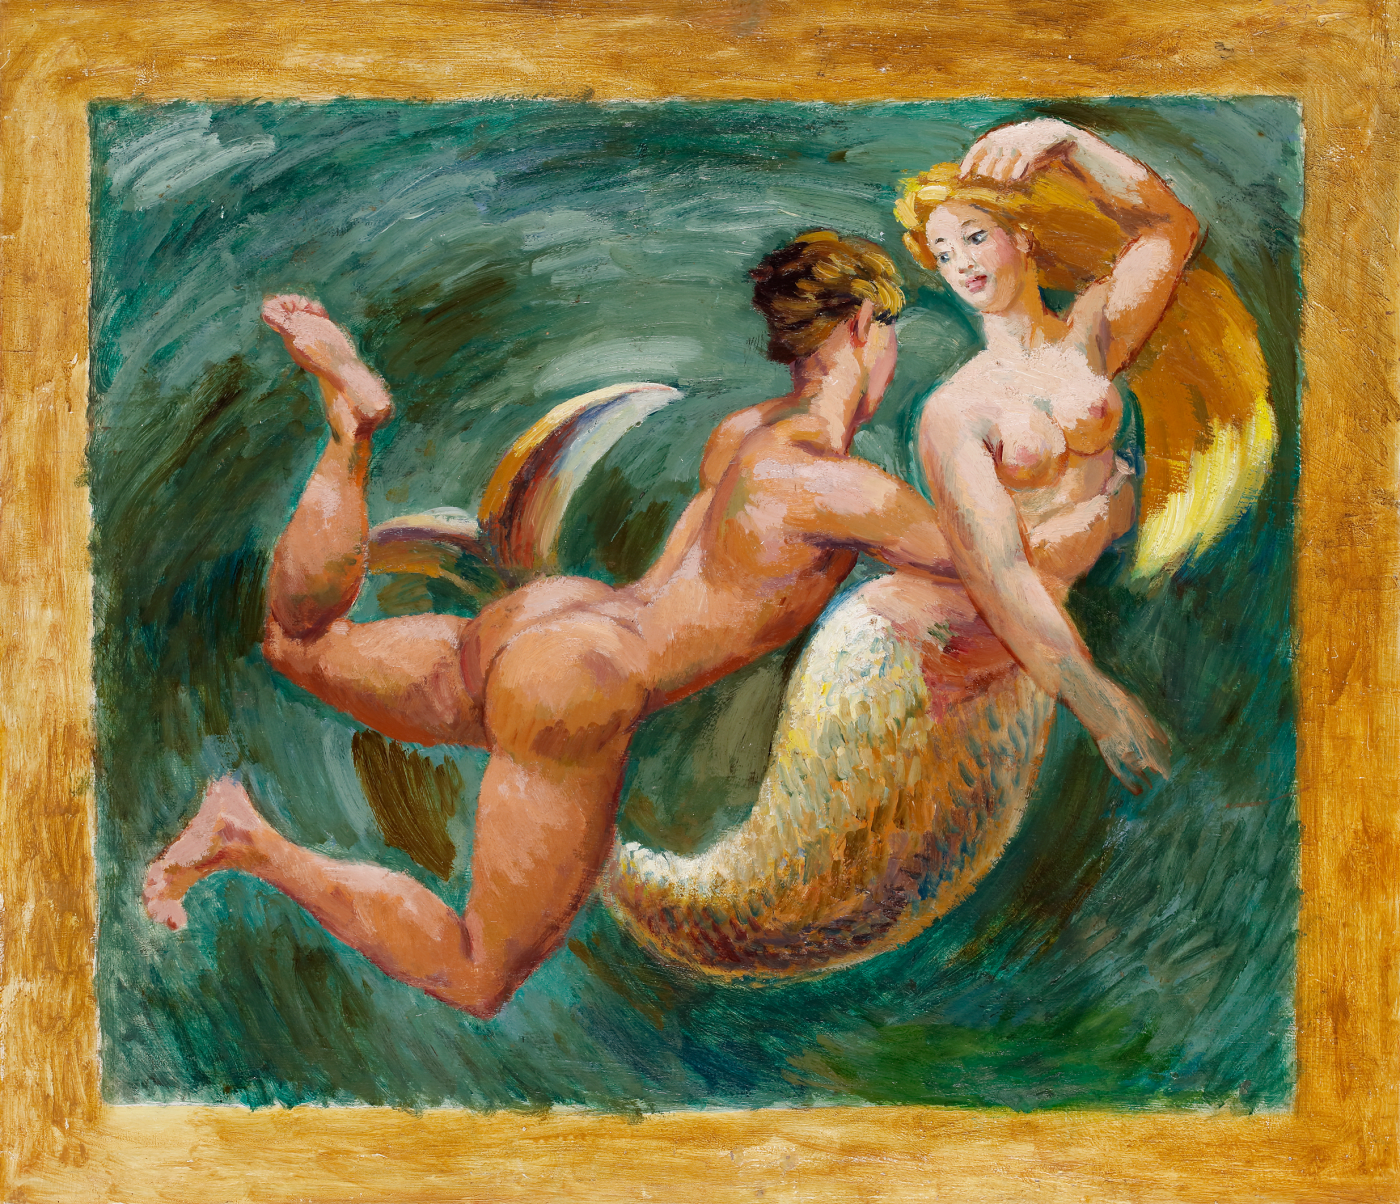 a man and a mermaid swimming in a mystical scene panted by bloomsbury group artist duncan grant the male figure is possibly his friend paul roche